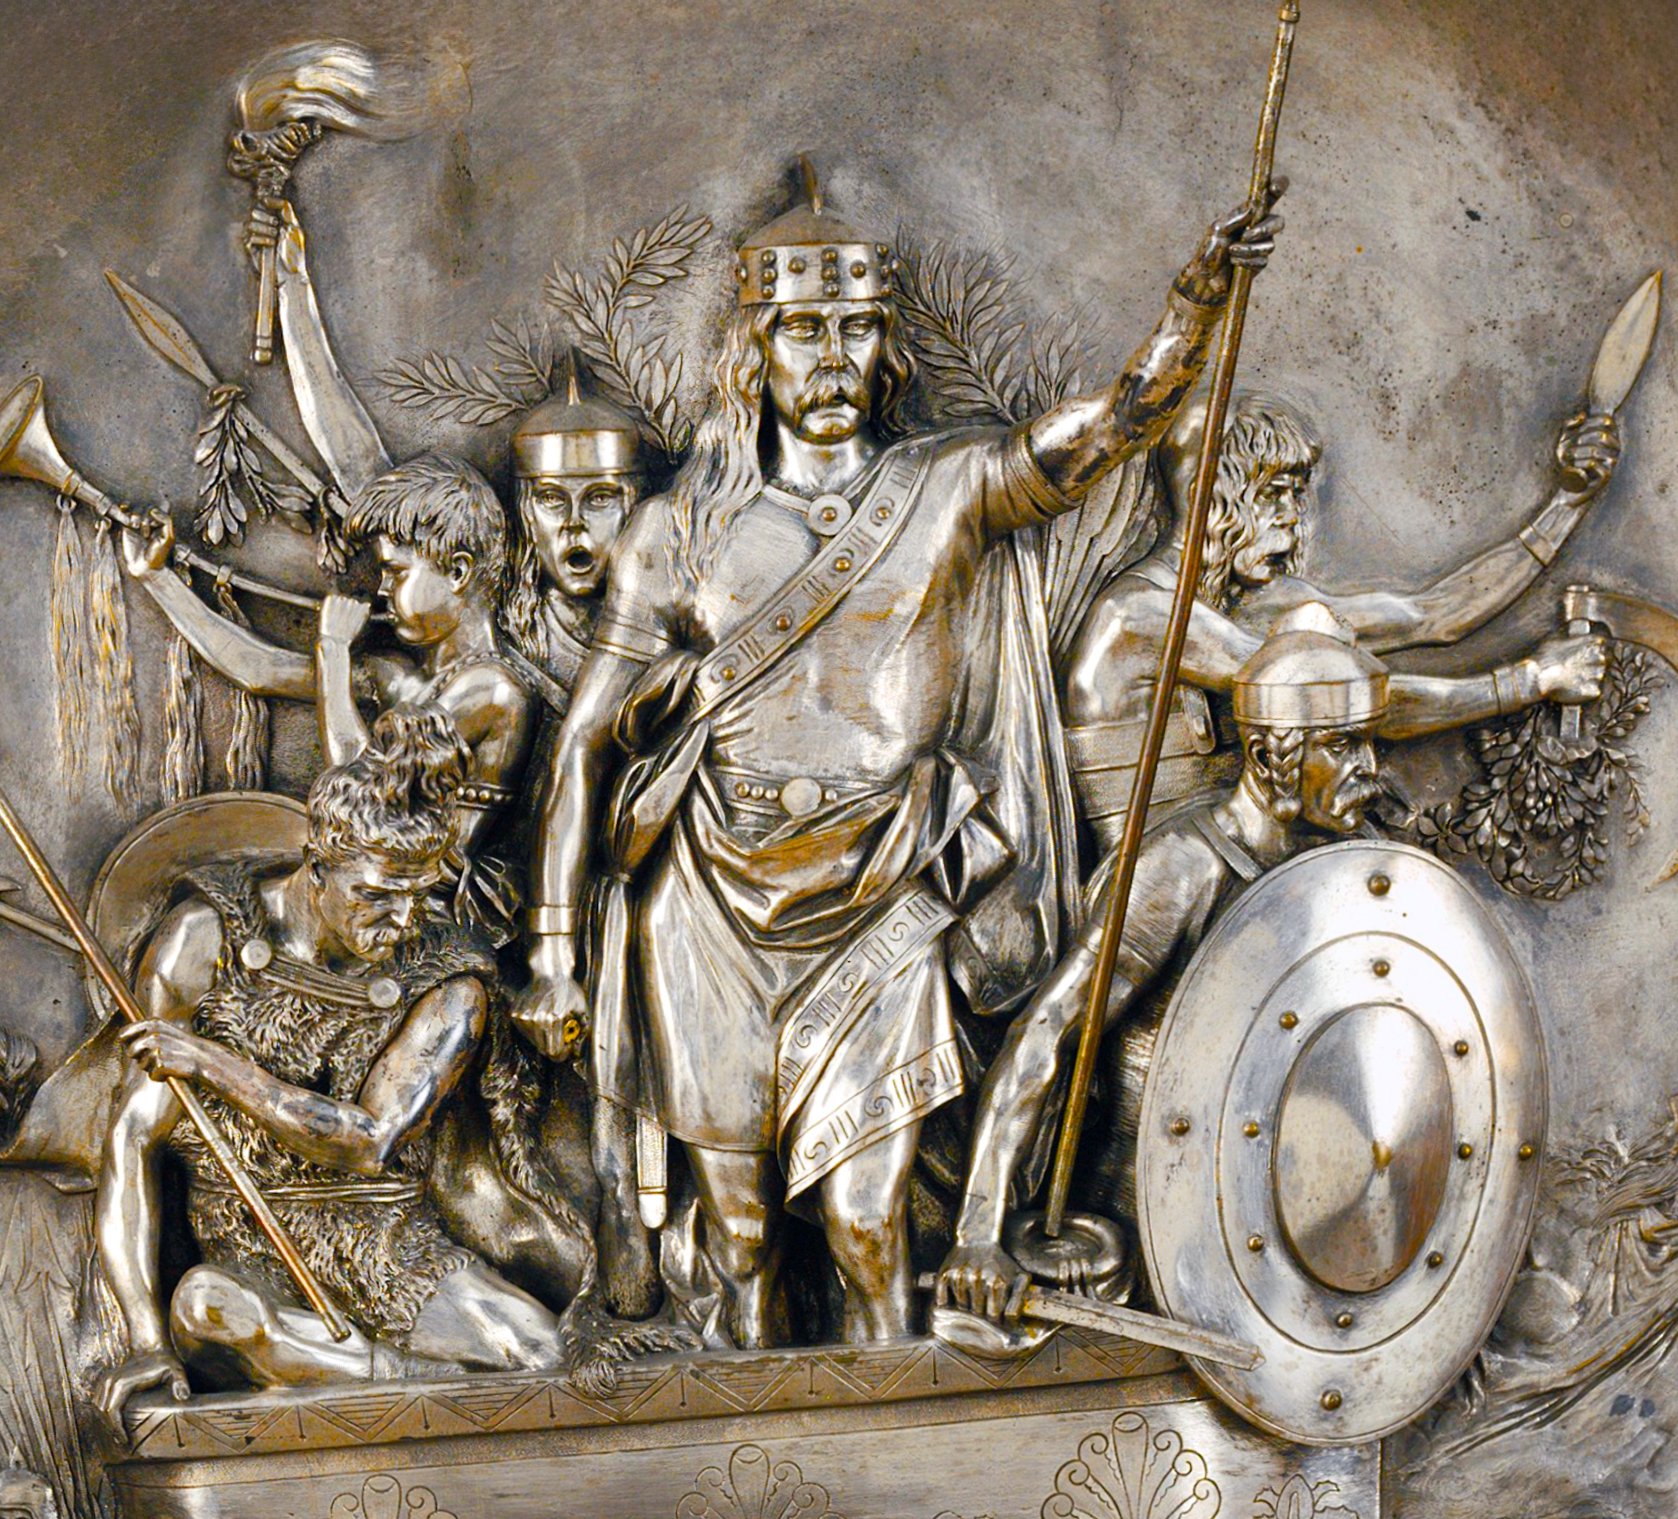 A metallic sculpture of a group of warriors in silver and gold tones, set against a background of foliage. The central warrior king Merovech holds a spear, while other smaller warriors hold spears, shields and swords.